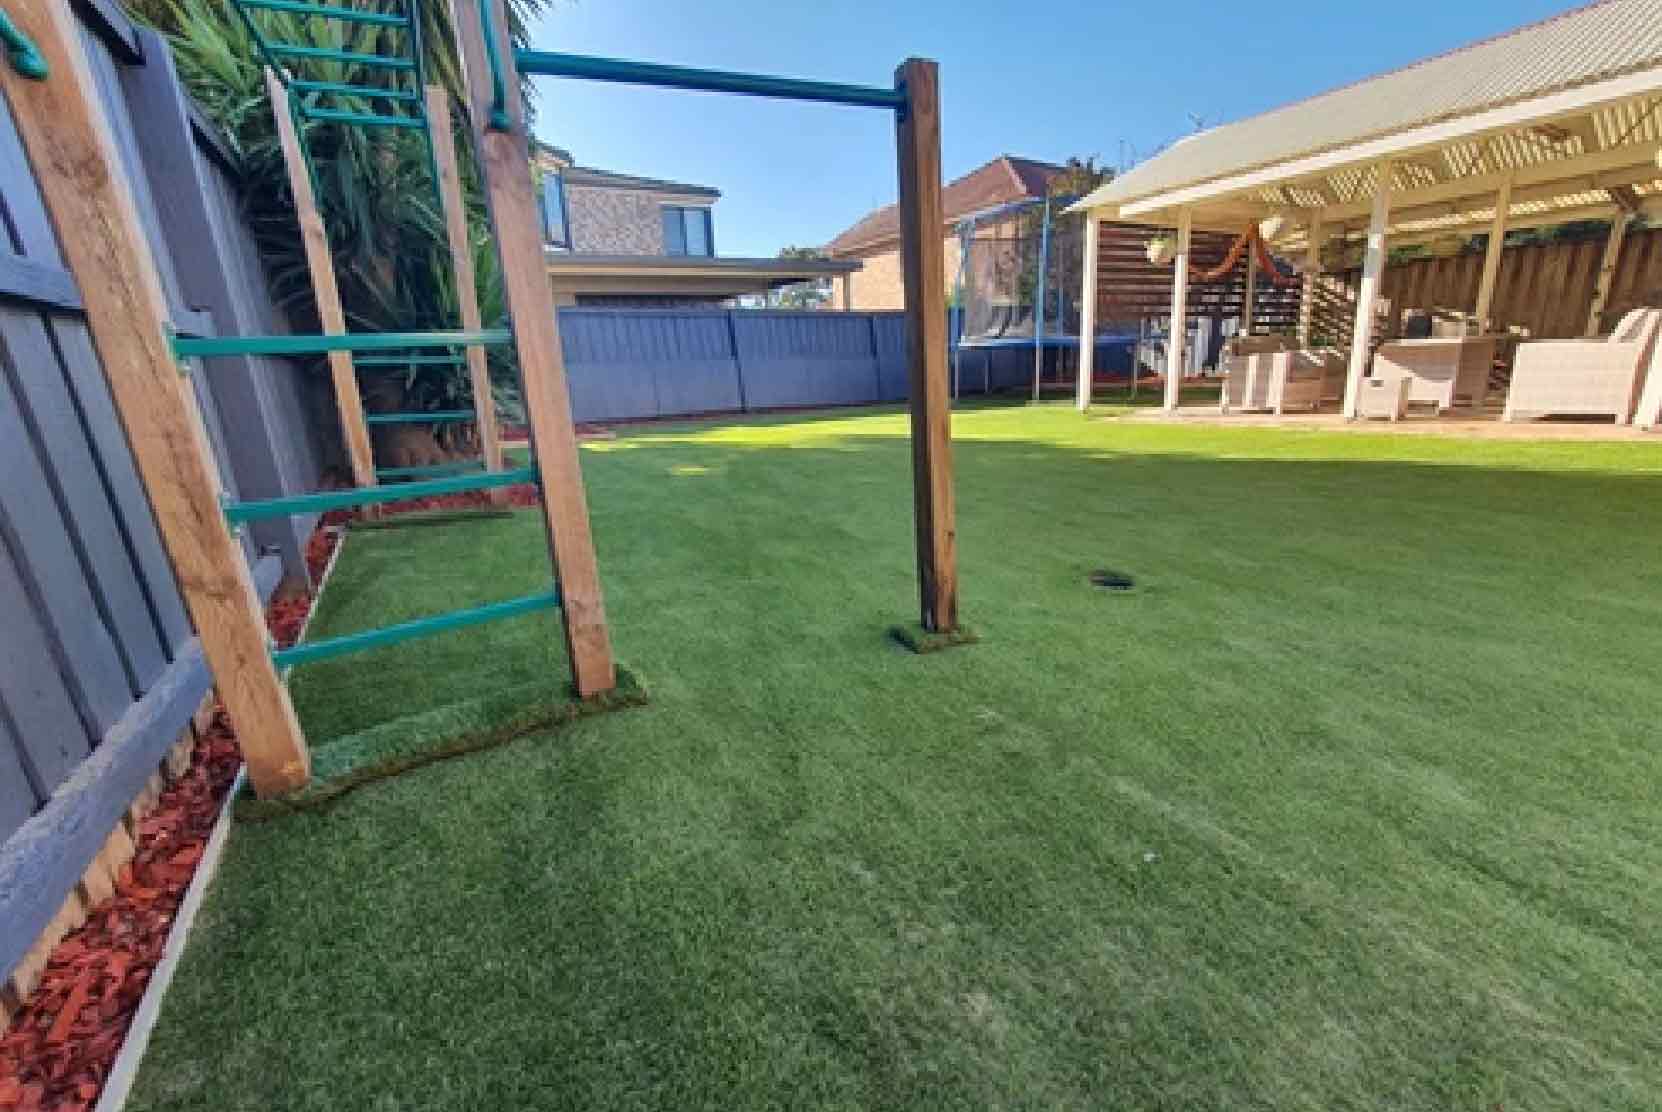 Landscaping Design & Artificial Grass Installers in Sydney